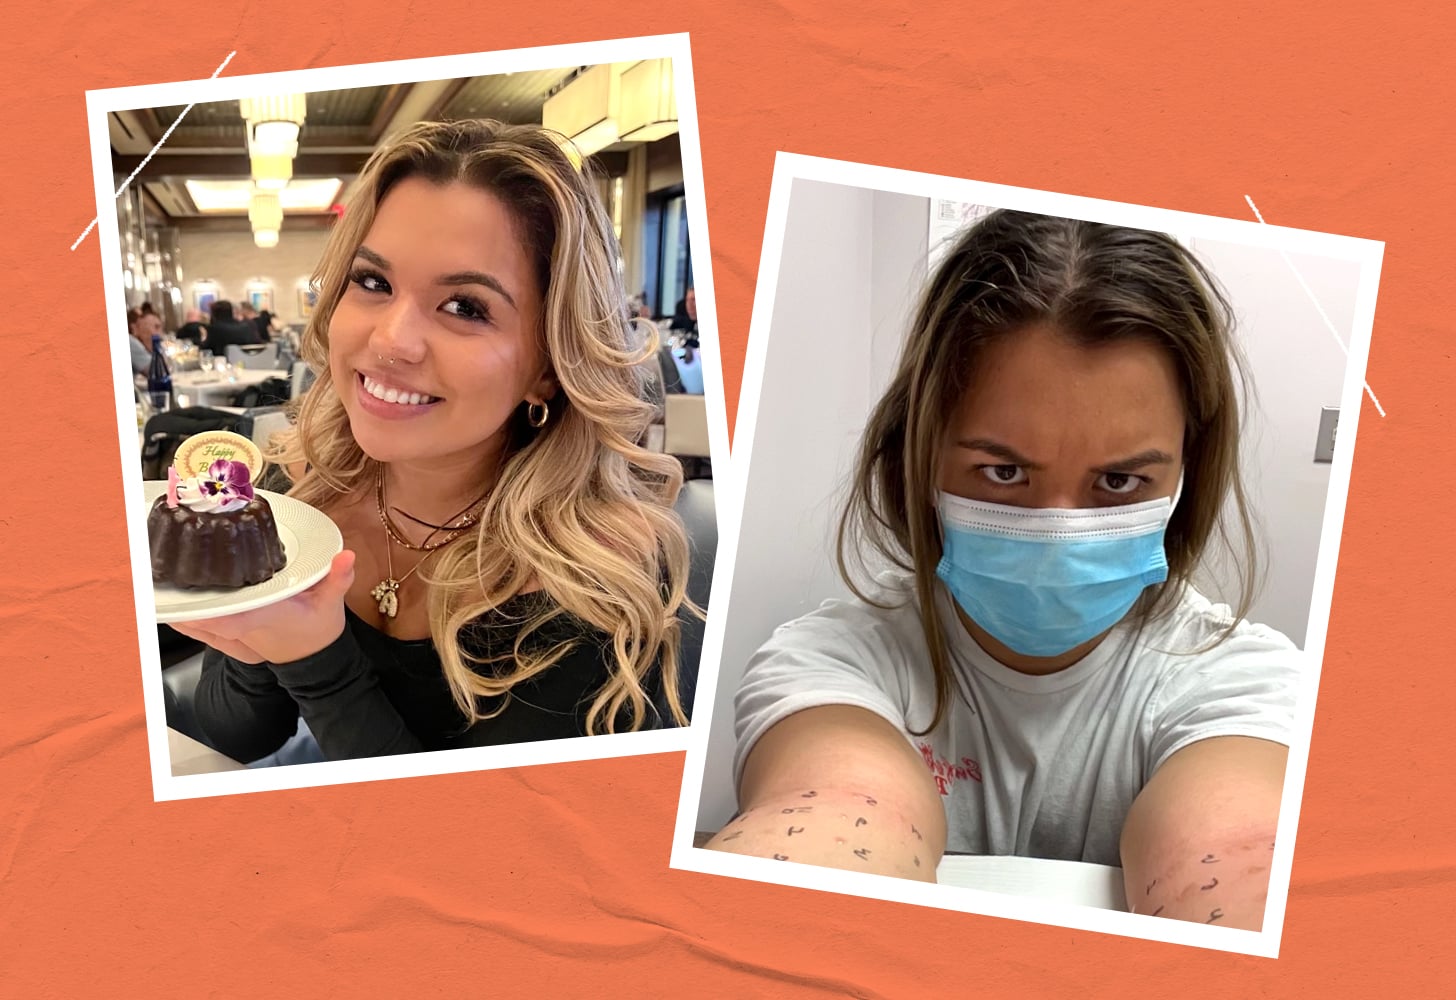 Lauren Ramos shares what it's like living with chronic allergies.